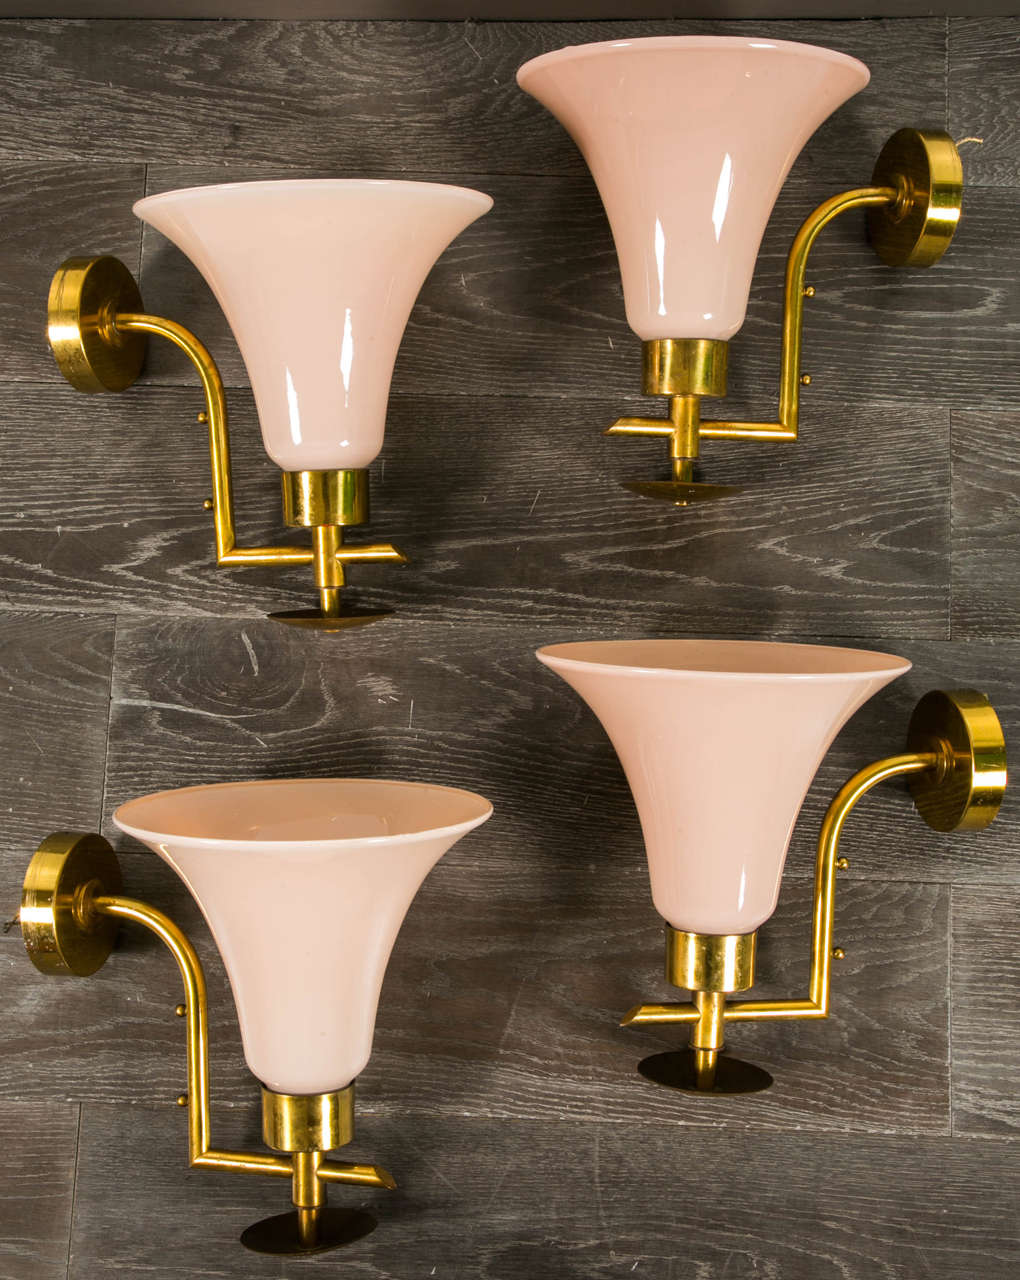 Elegant set of four sconces in brass with nice top in glass, pink white color, nice lighting,
circa 1960.
Please note that it's possible to have eight others sconces with the same design.
Provenance: French hotel in the 1960s.